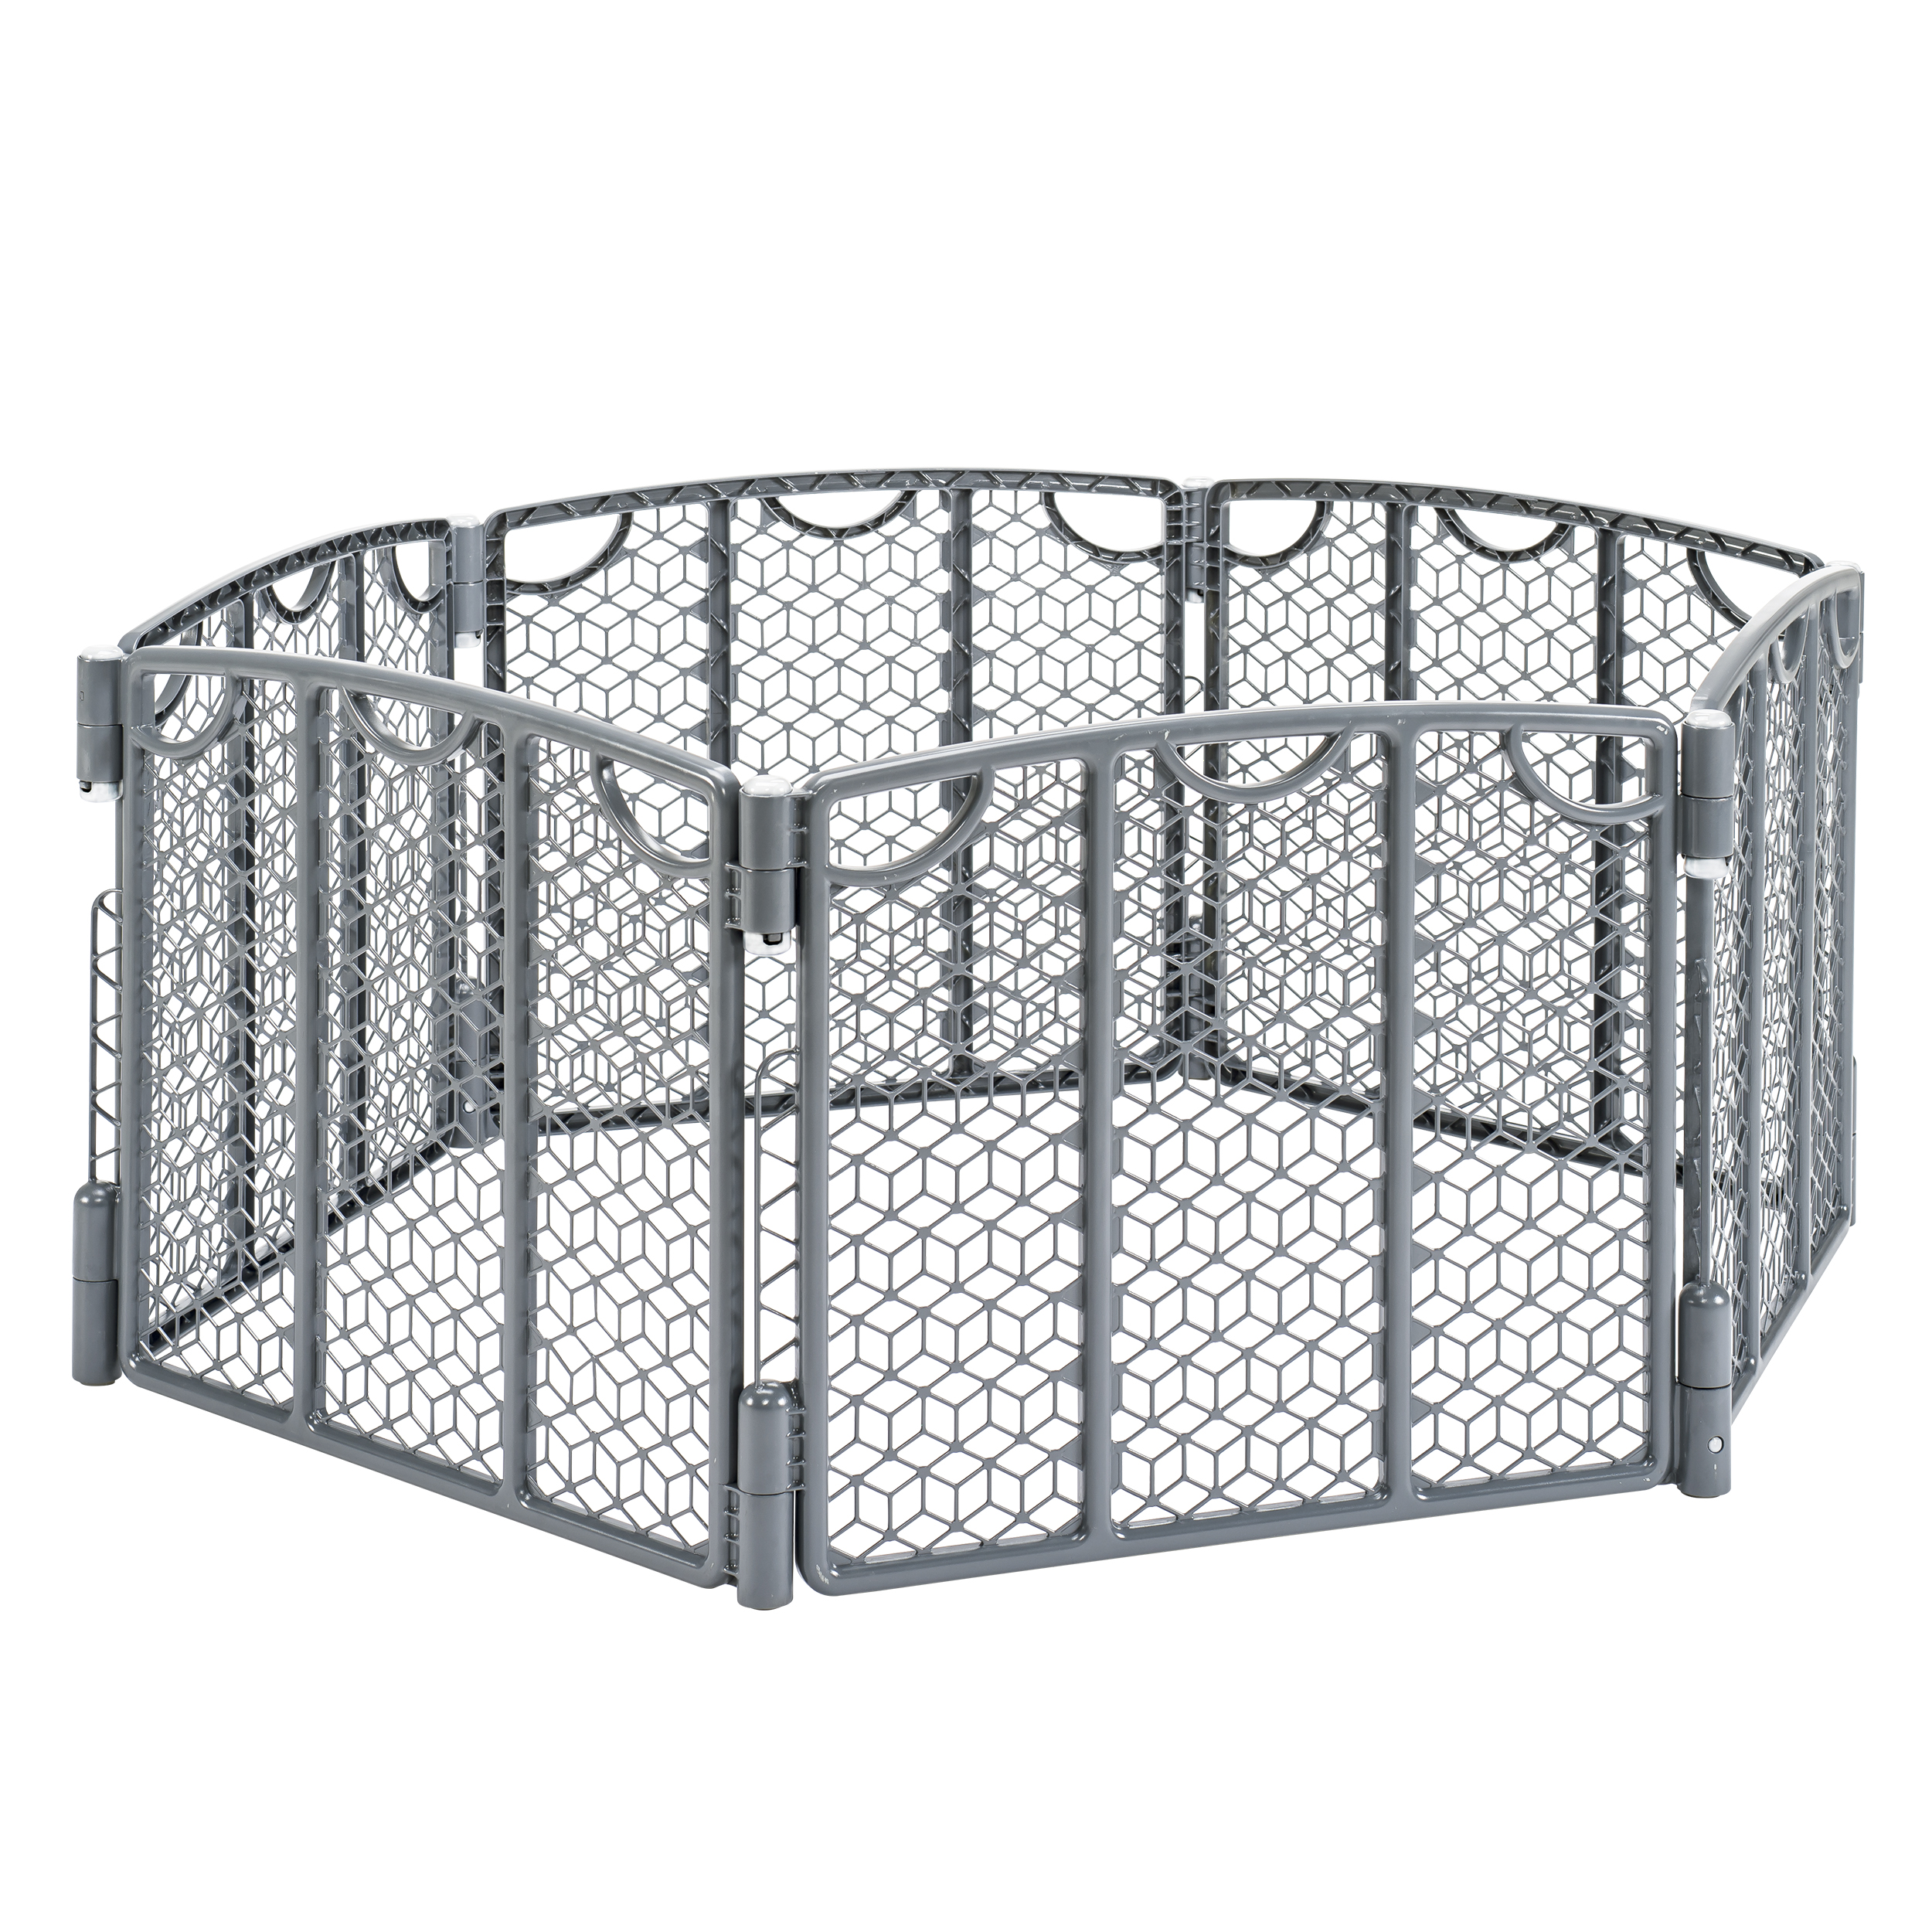 Evenflo Versatile Play Space Adjustable Freestanding Play Space Plastic Gate, 6-Panels, Cool Gray, Unisex - image 3 of 17